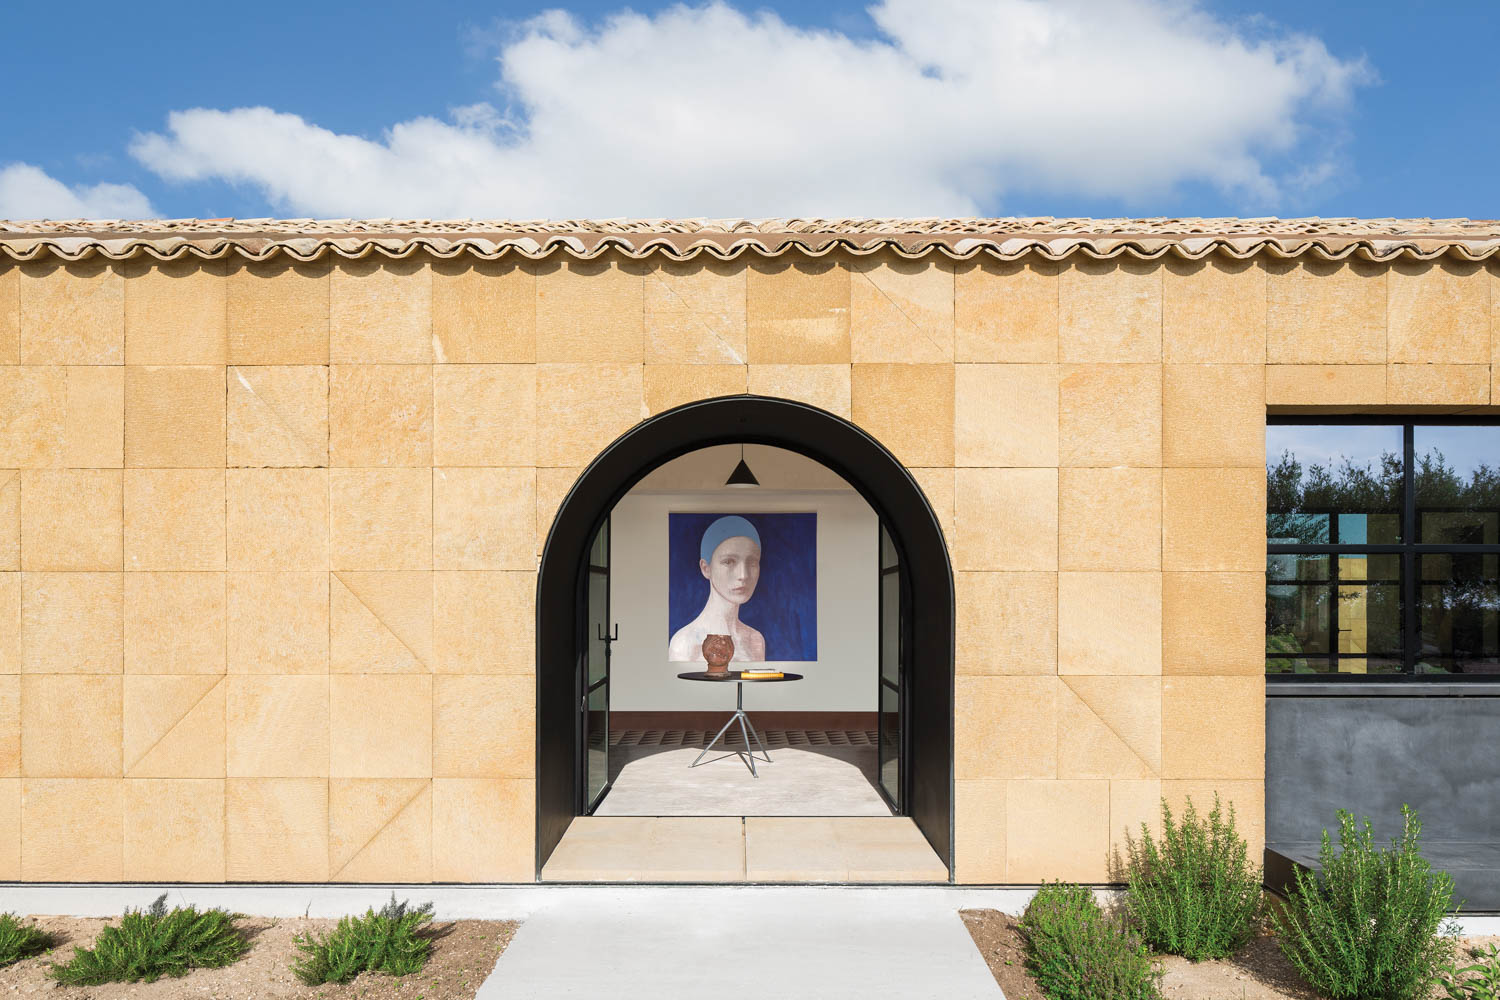 a painted portrait looks out at the arched doorway of this Italian luxury home